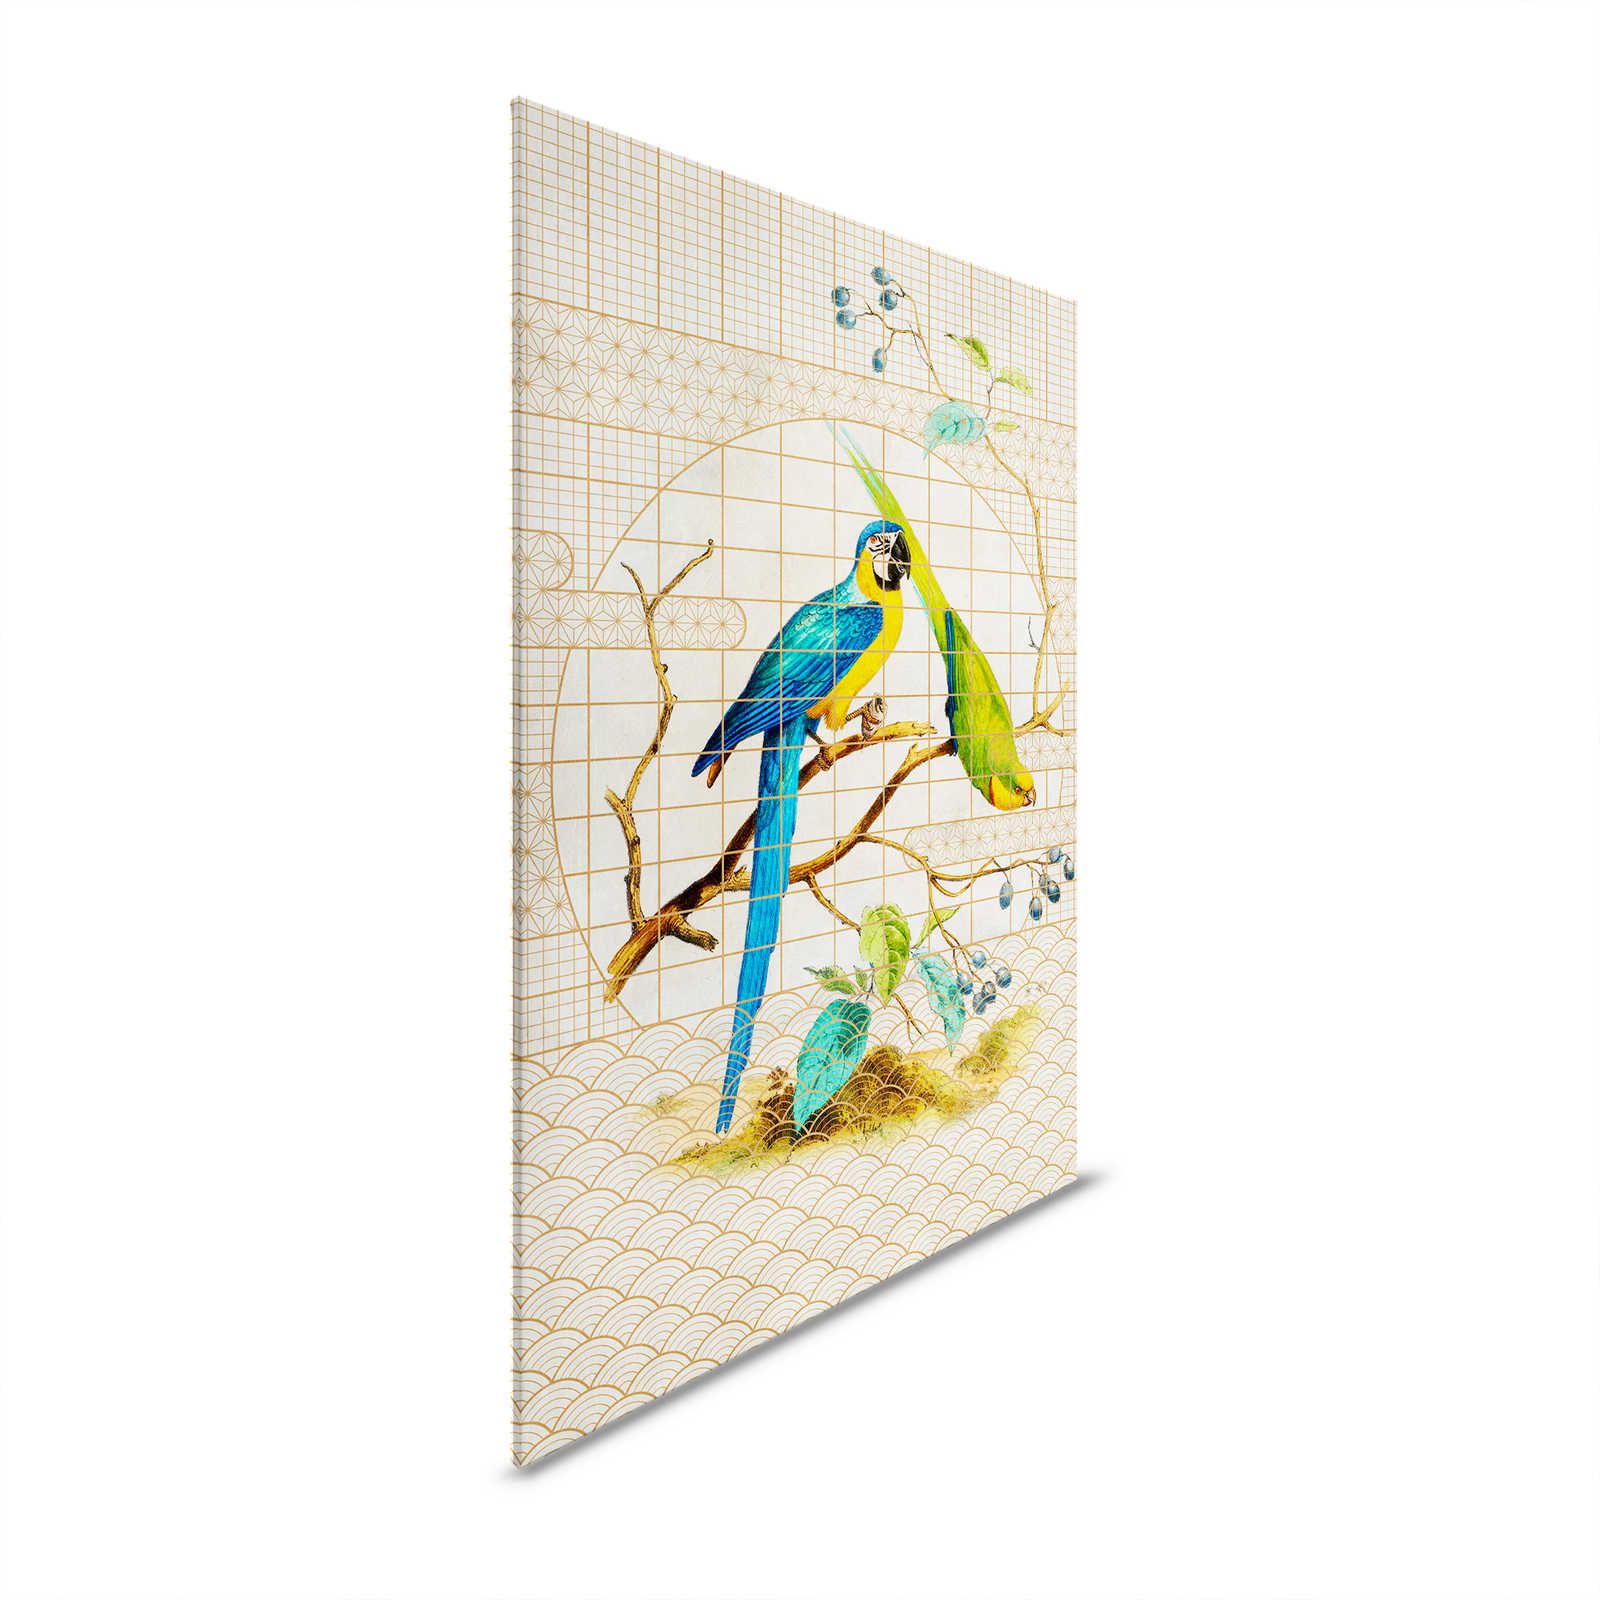         Aviary 3 - Vintage Style Parrot & Golden Pattern Canvas Painting - 0.90 m x 0.60 m
    